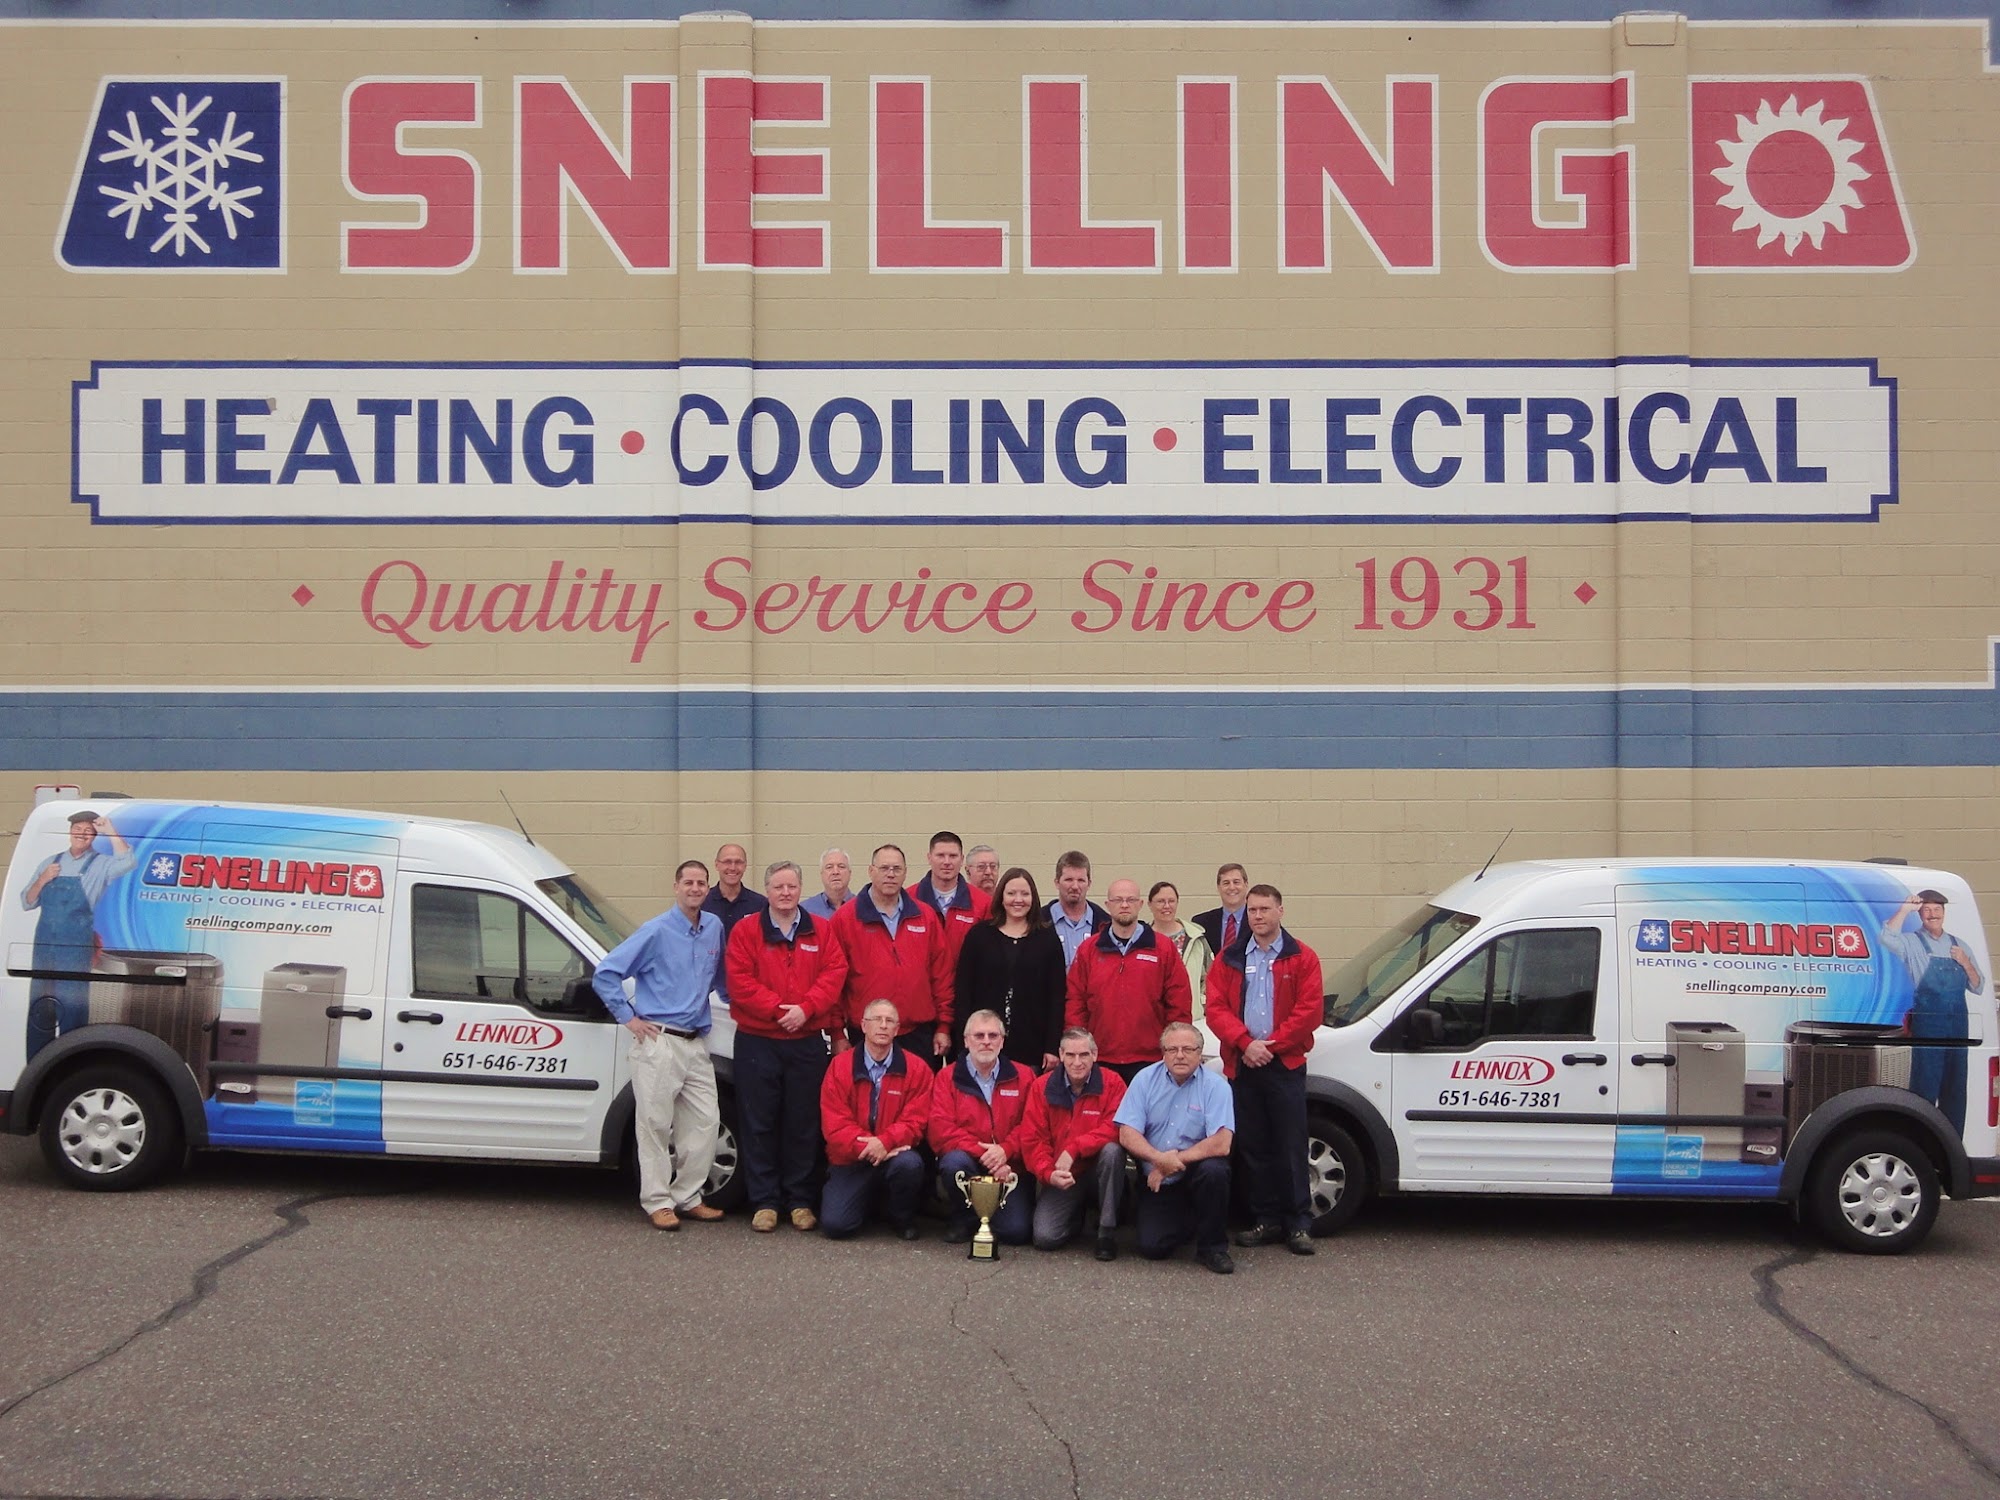 Snelling Heating Cooling and Electrical